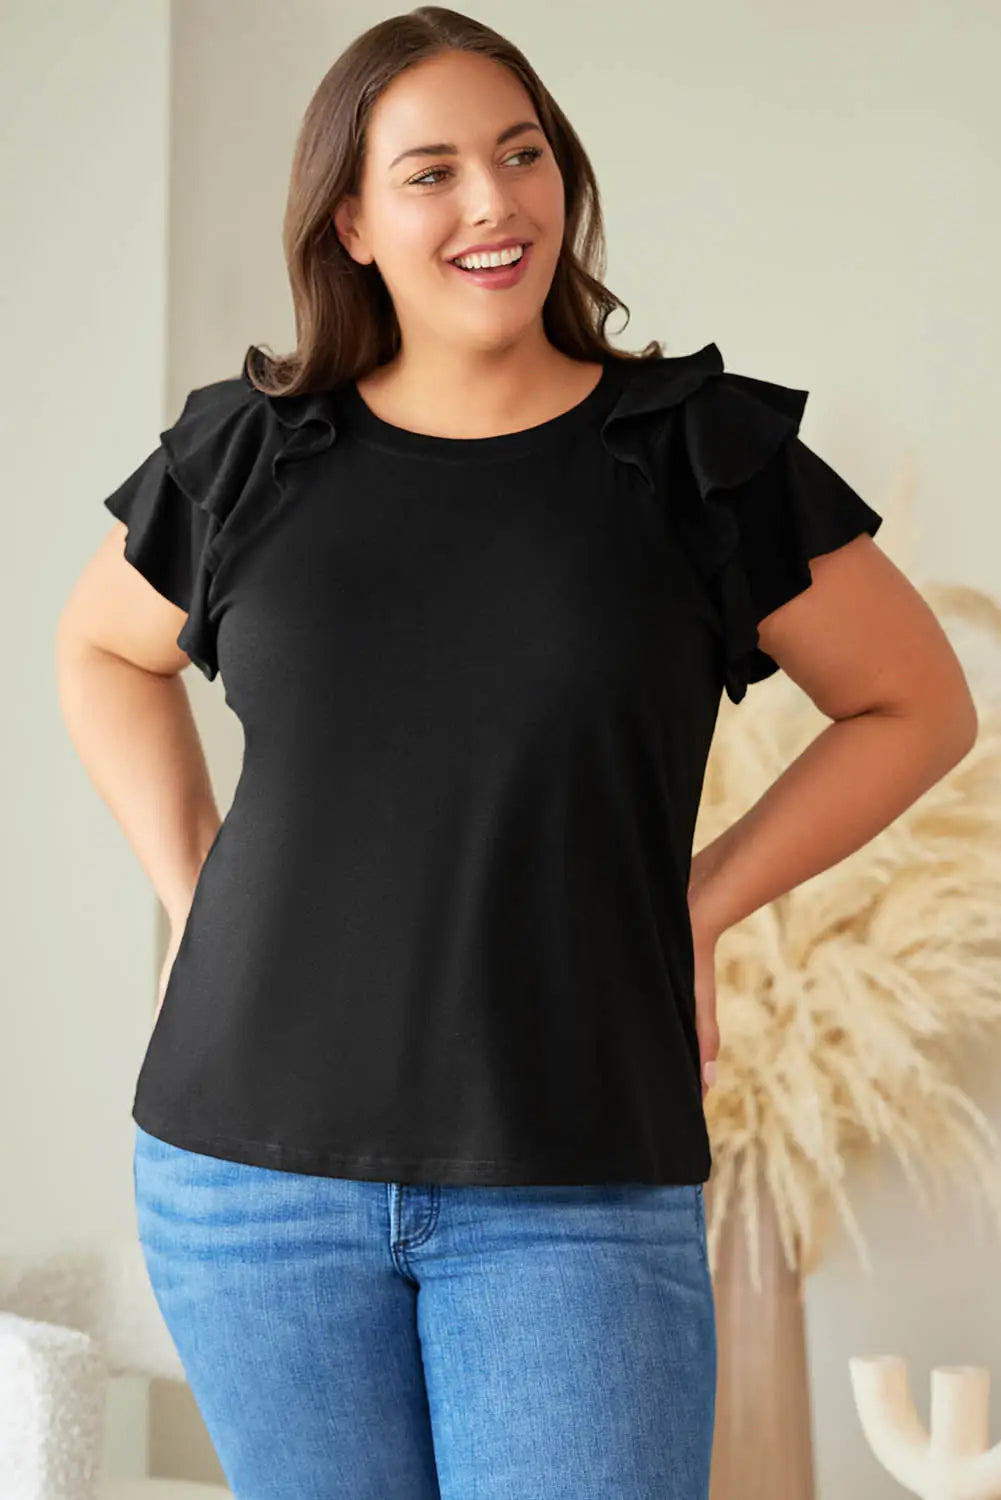 Black solid color ruffle tiered sleeve plus size tee